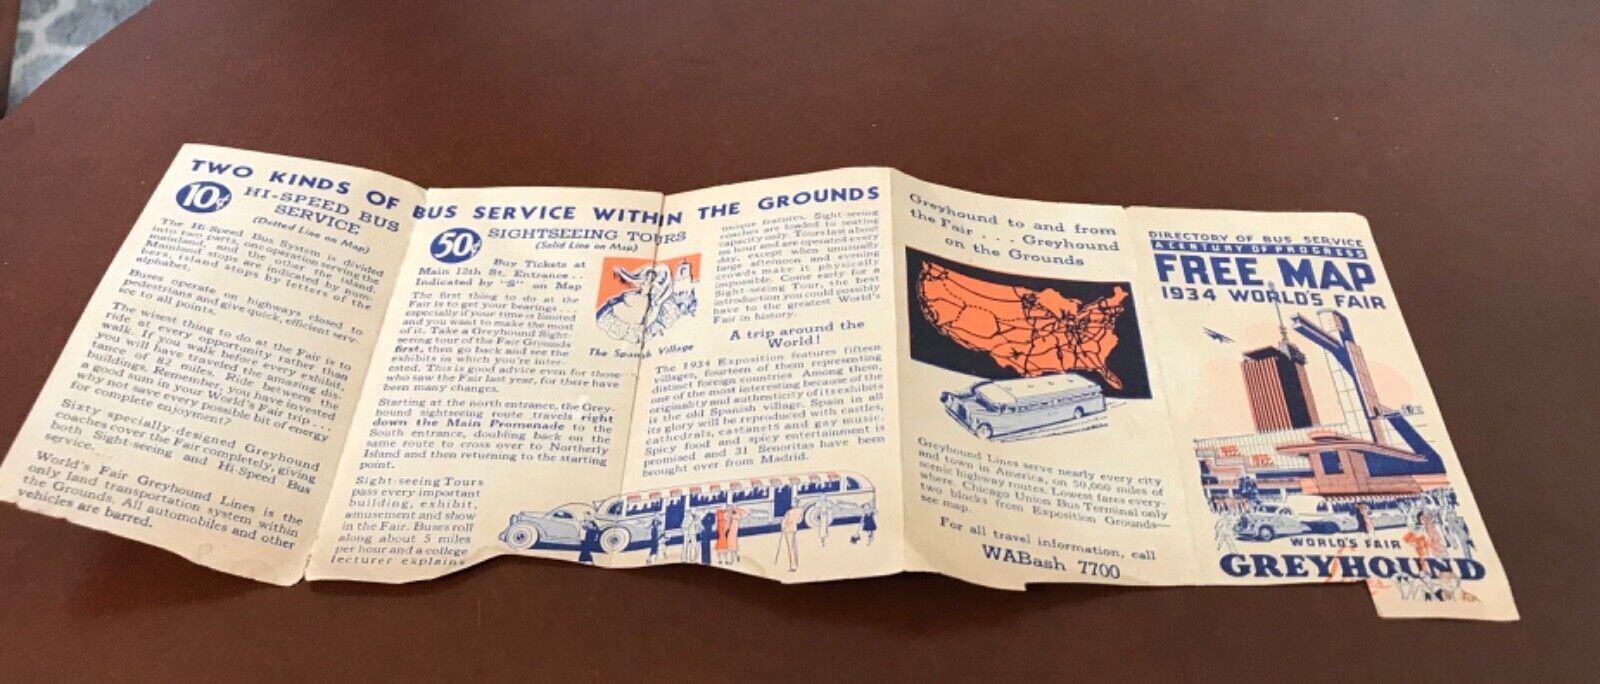 VTG 1934 Directory of Bus Service Map..World's Fair 1934